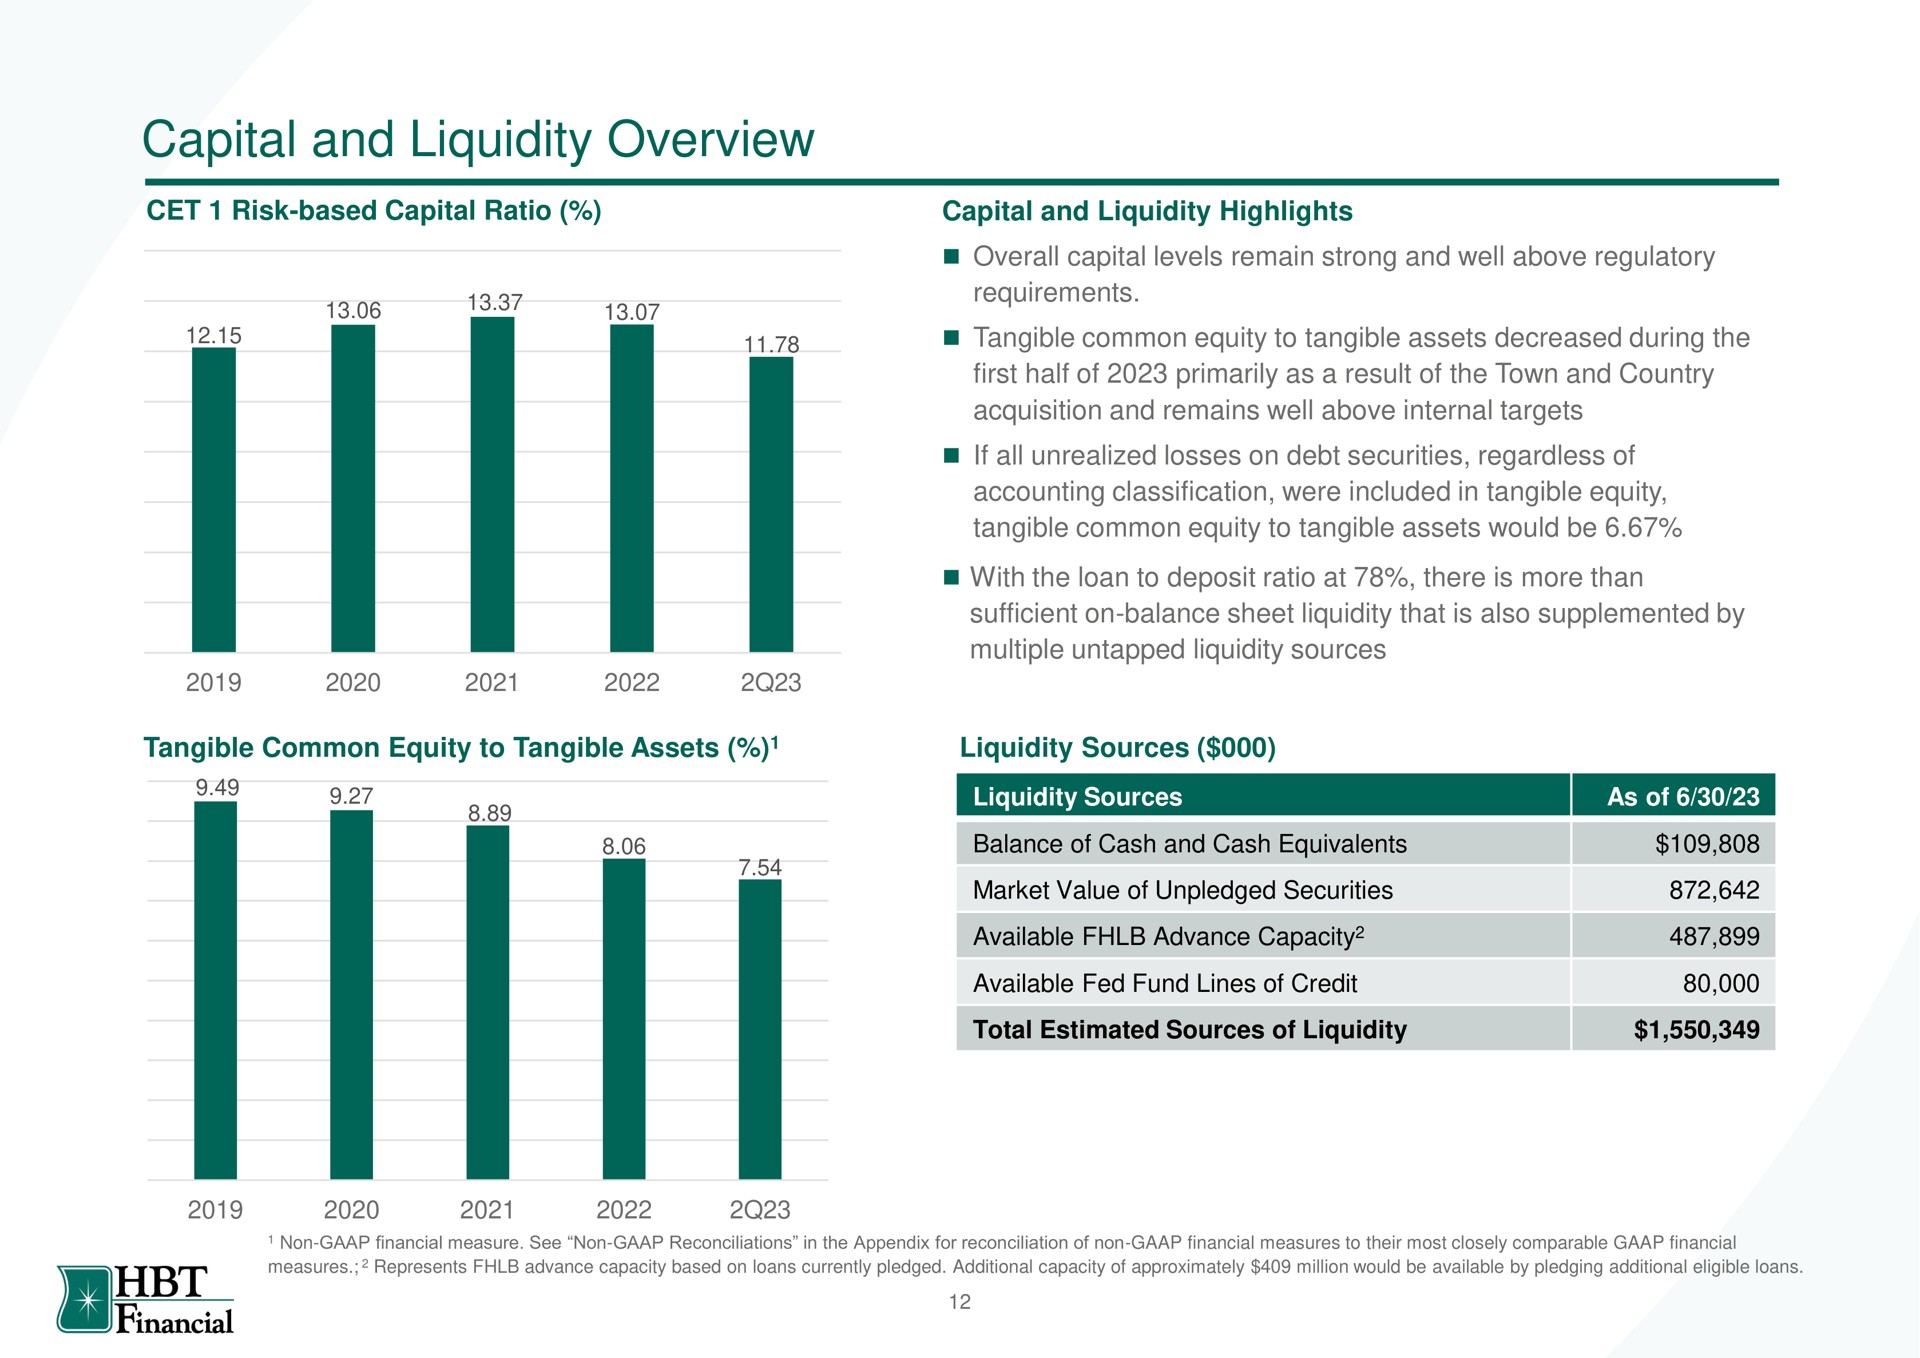 capital and liquidity overview sources as of bee | HBT Financial